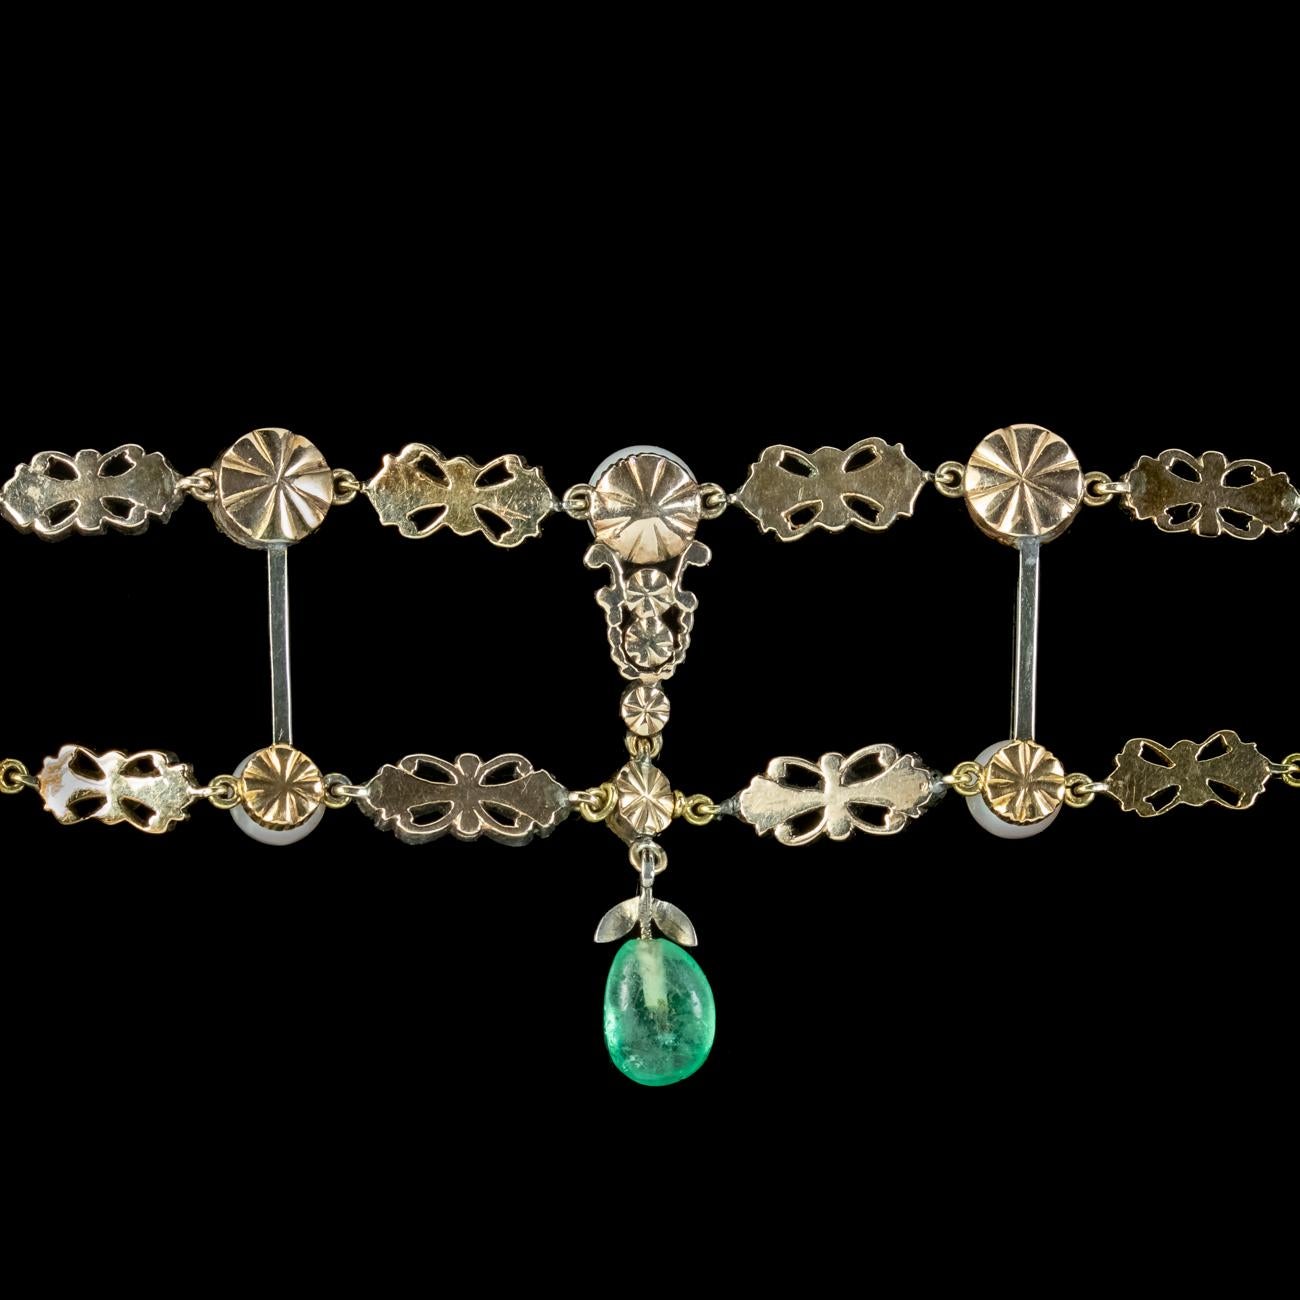 An exquisite antique Georgian bracelet from the early 19th Century made up of two rows of silver links, backed in 18ct gold and connected by slender bars in the middle.

Each link is decorated with twinkling diamonds, gleaming pearls and green